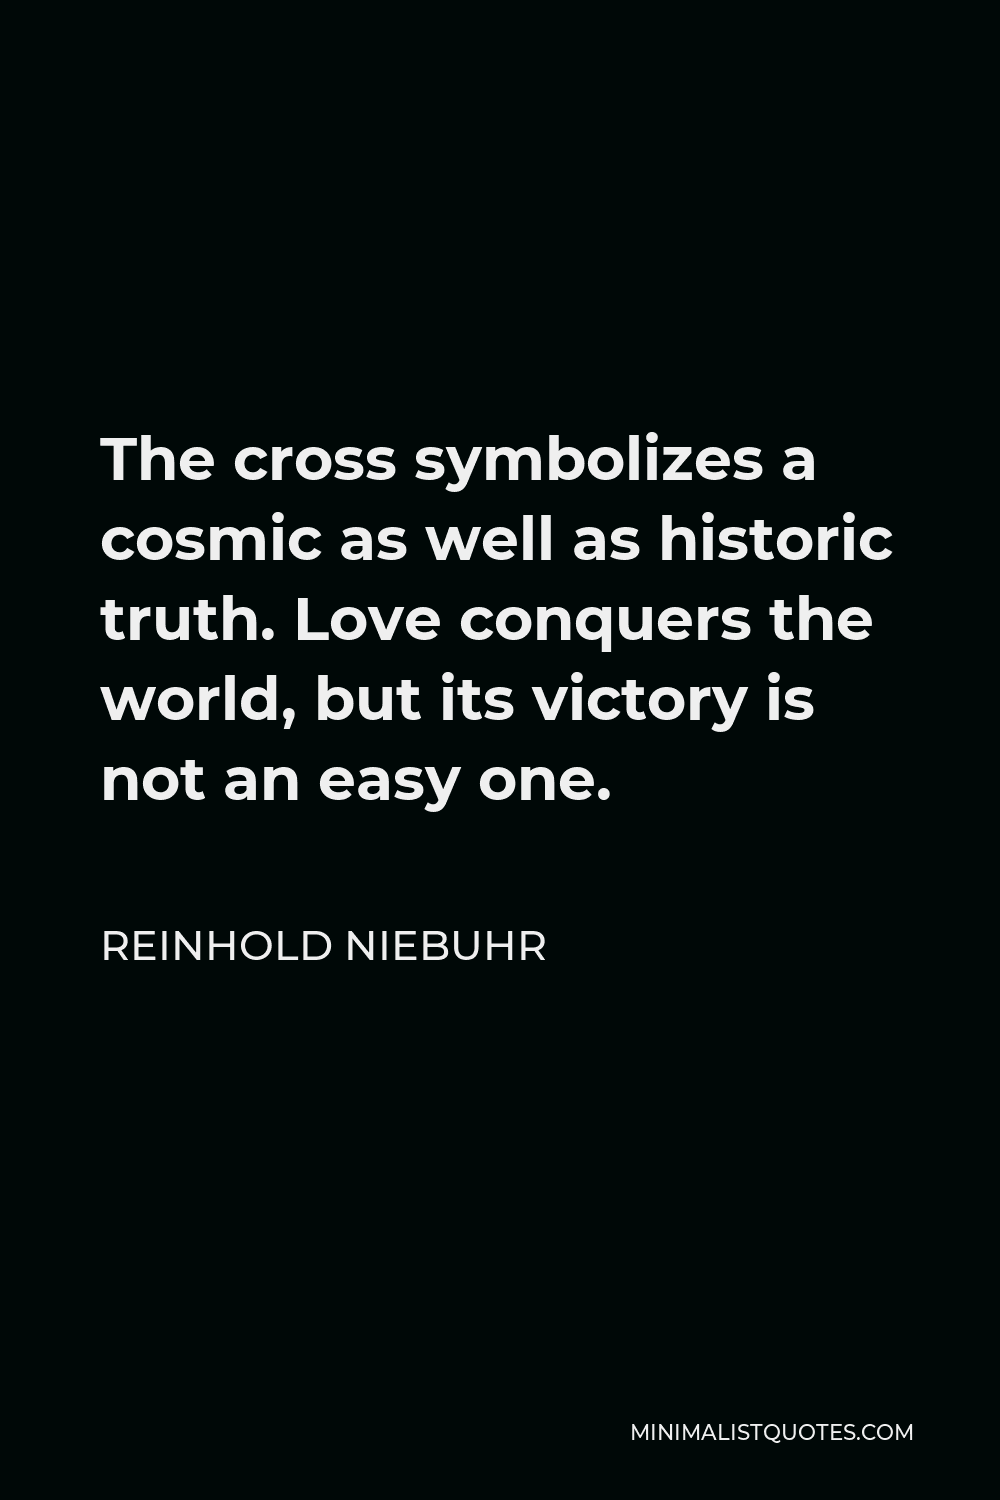 Reinhold Niebuhr Quote - The cross symbolizes a cosmic as well as historic truth. Love conquers the world, but its victory is not an easy one.